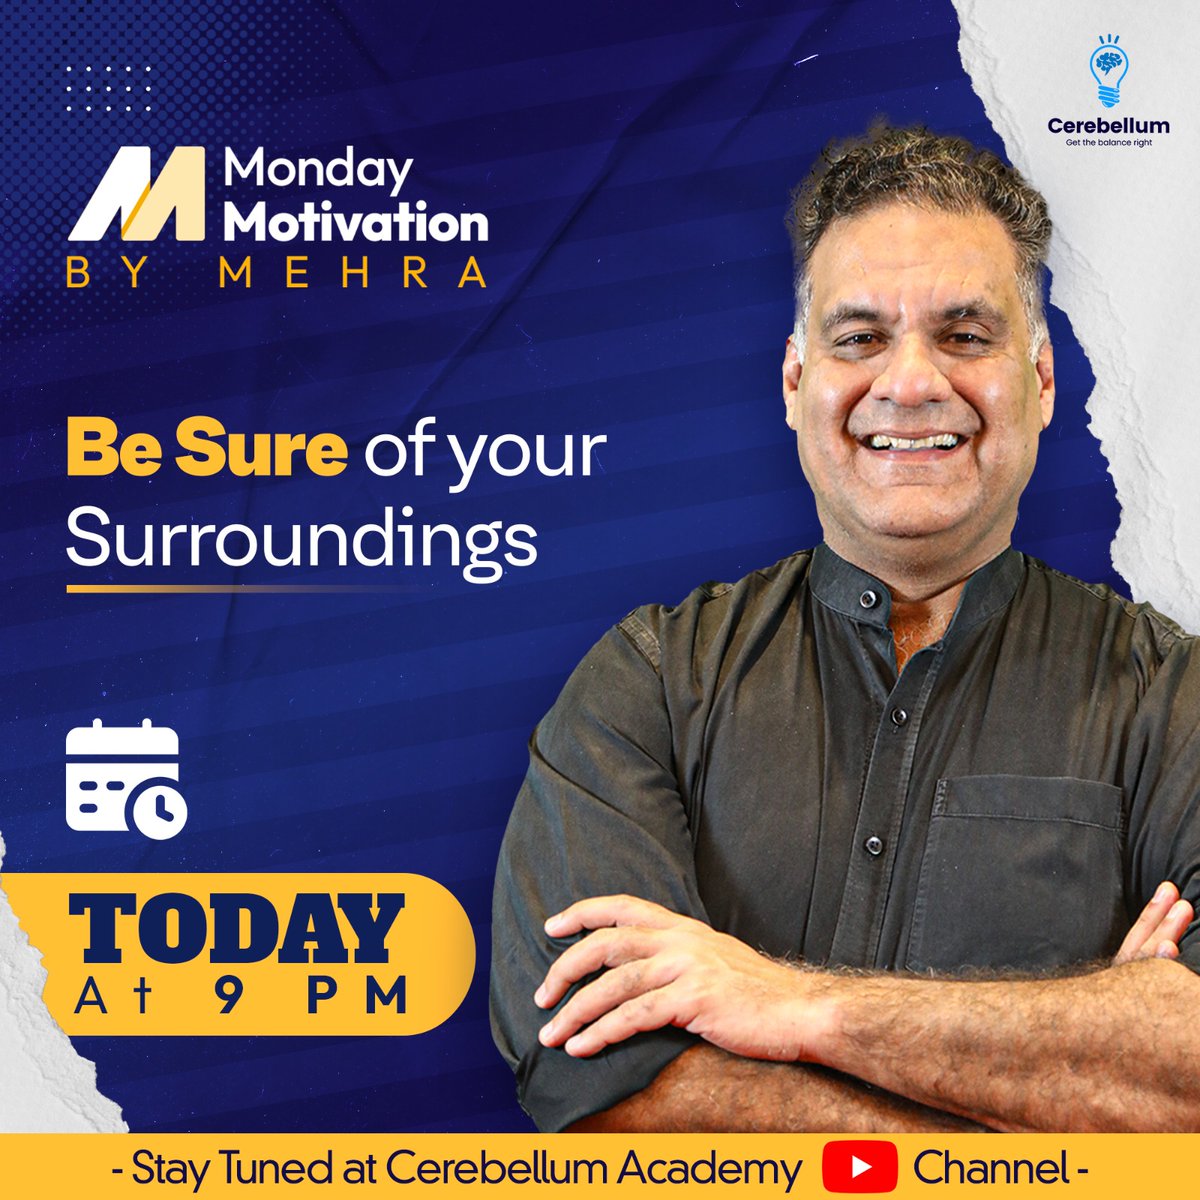 Start your Monday with a boost of motivation from Apurv Mehra! Stay confident and be aware of your surroundings.

Subscribe Cerebellum YouTube channel!!!
(YouTube link in bio)
.
Cerebellum Academy
An Institute For The Students by Teachers

#DrApurvMehra #MMM #CerebellumAcademy